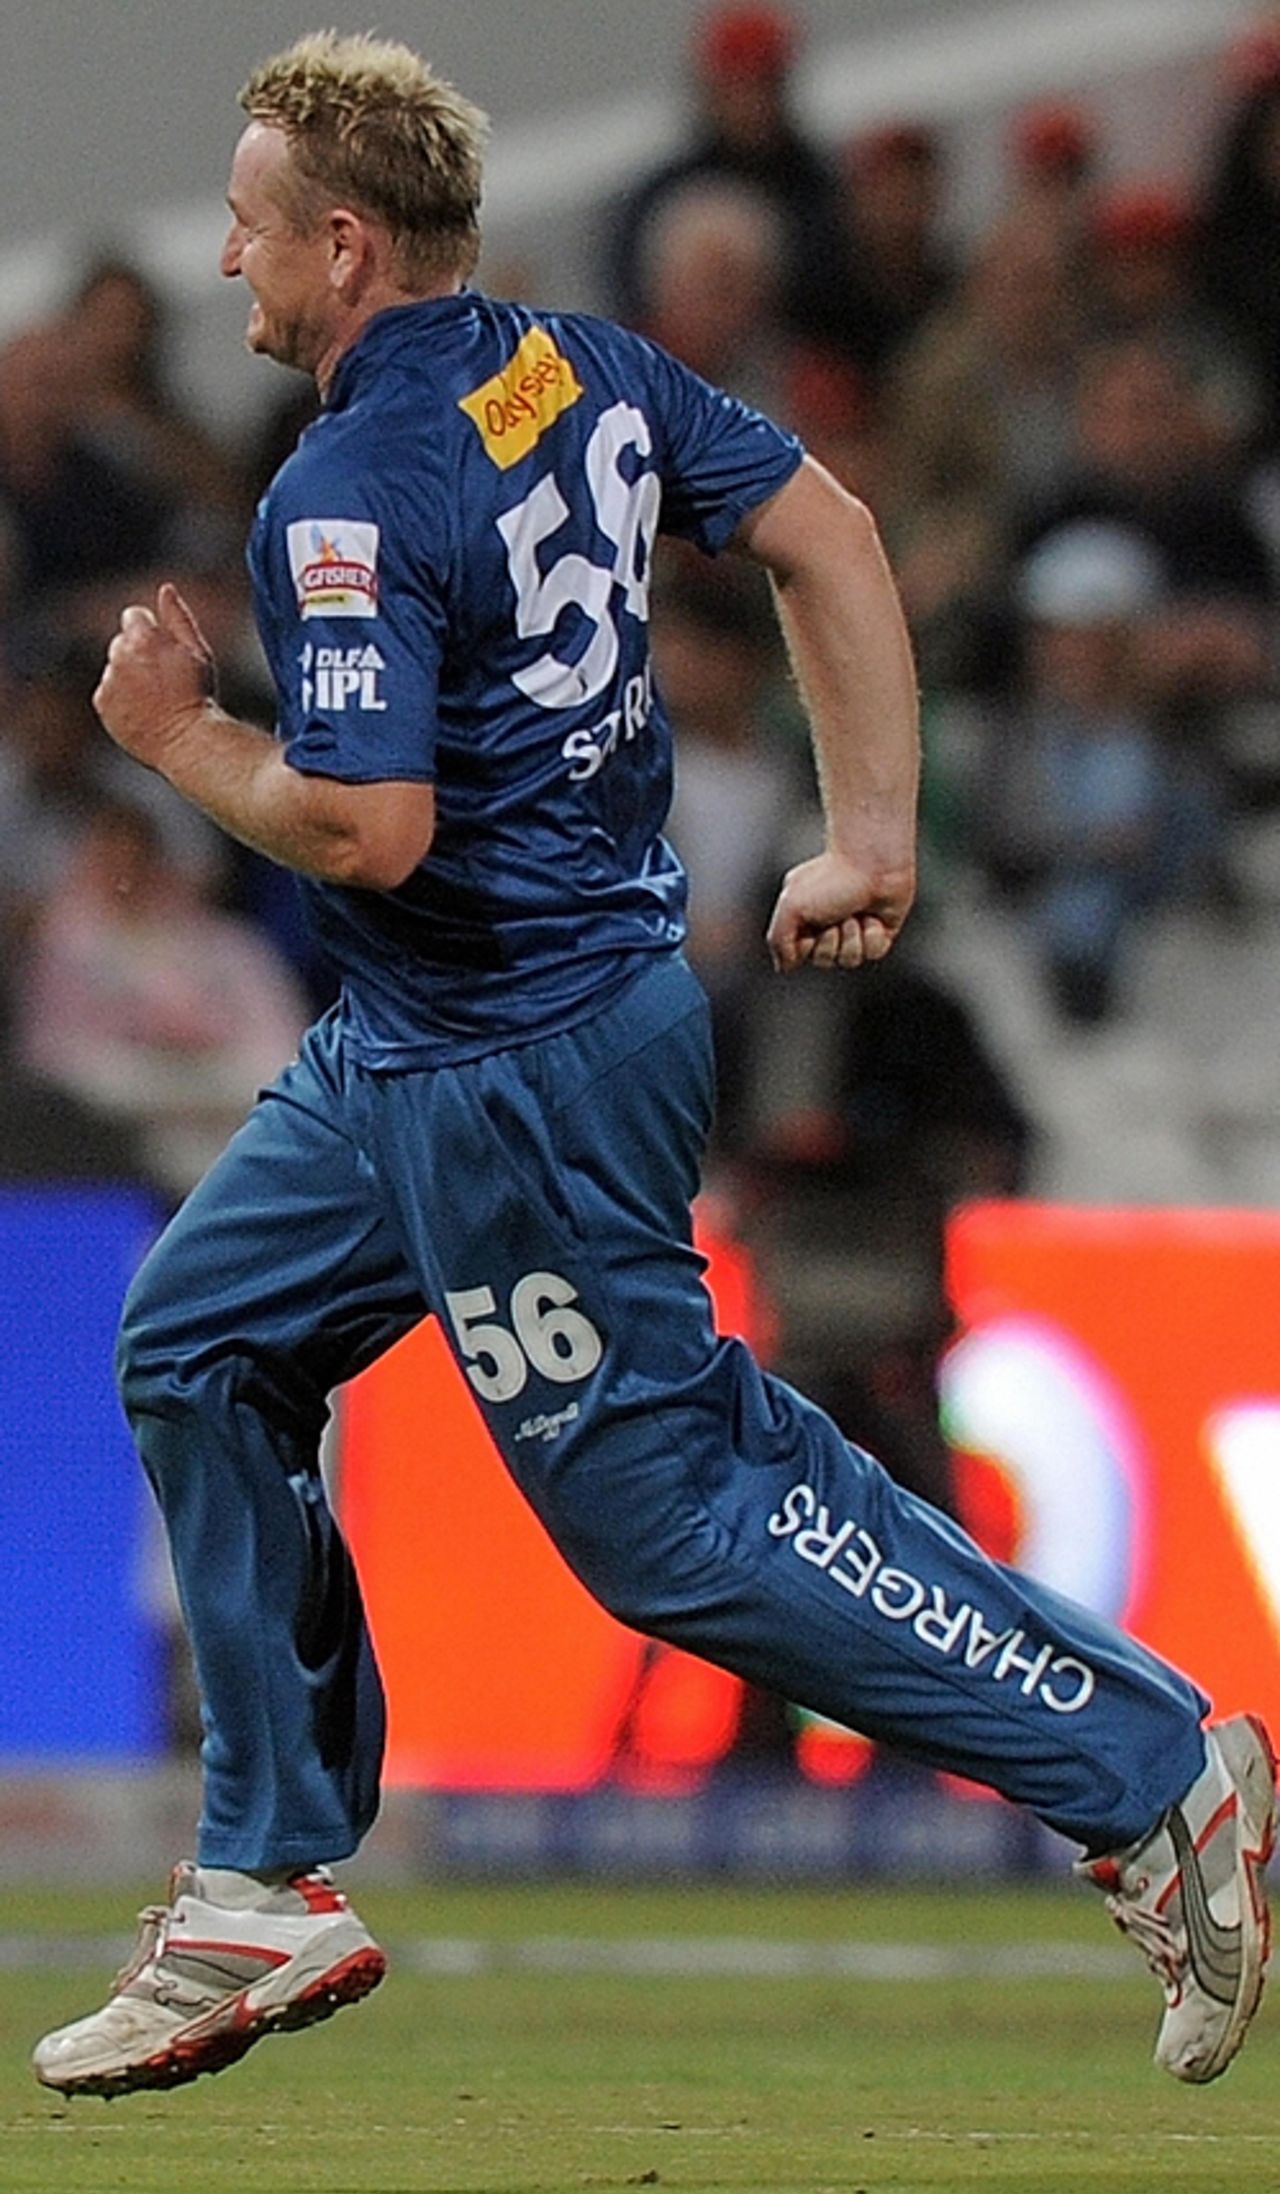 Scott Styris is ecstatic after dismissing Rahul Dravid, Bangalore Royal Challengers v Deccan Chargers, IPL, 8th game, Cape Town, April 22, 2009